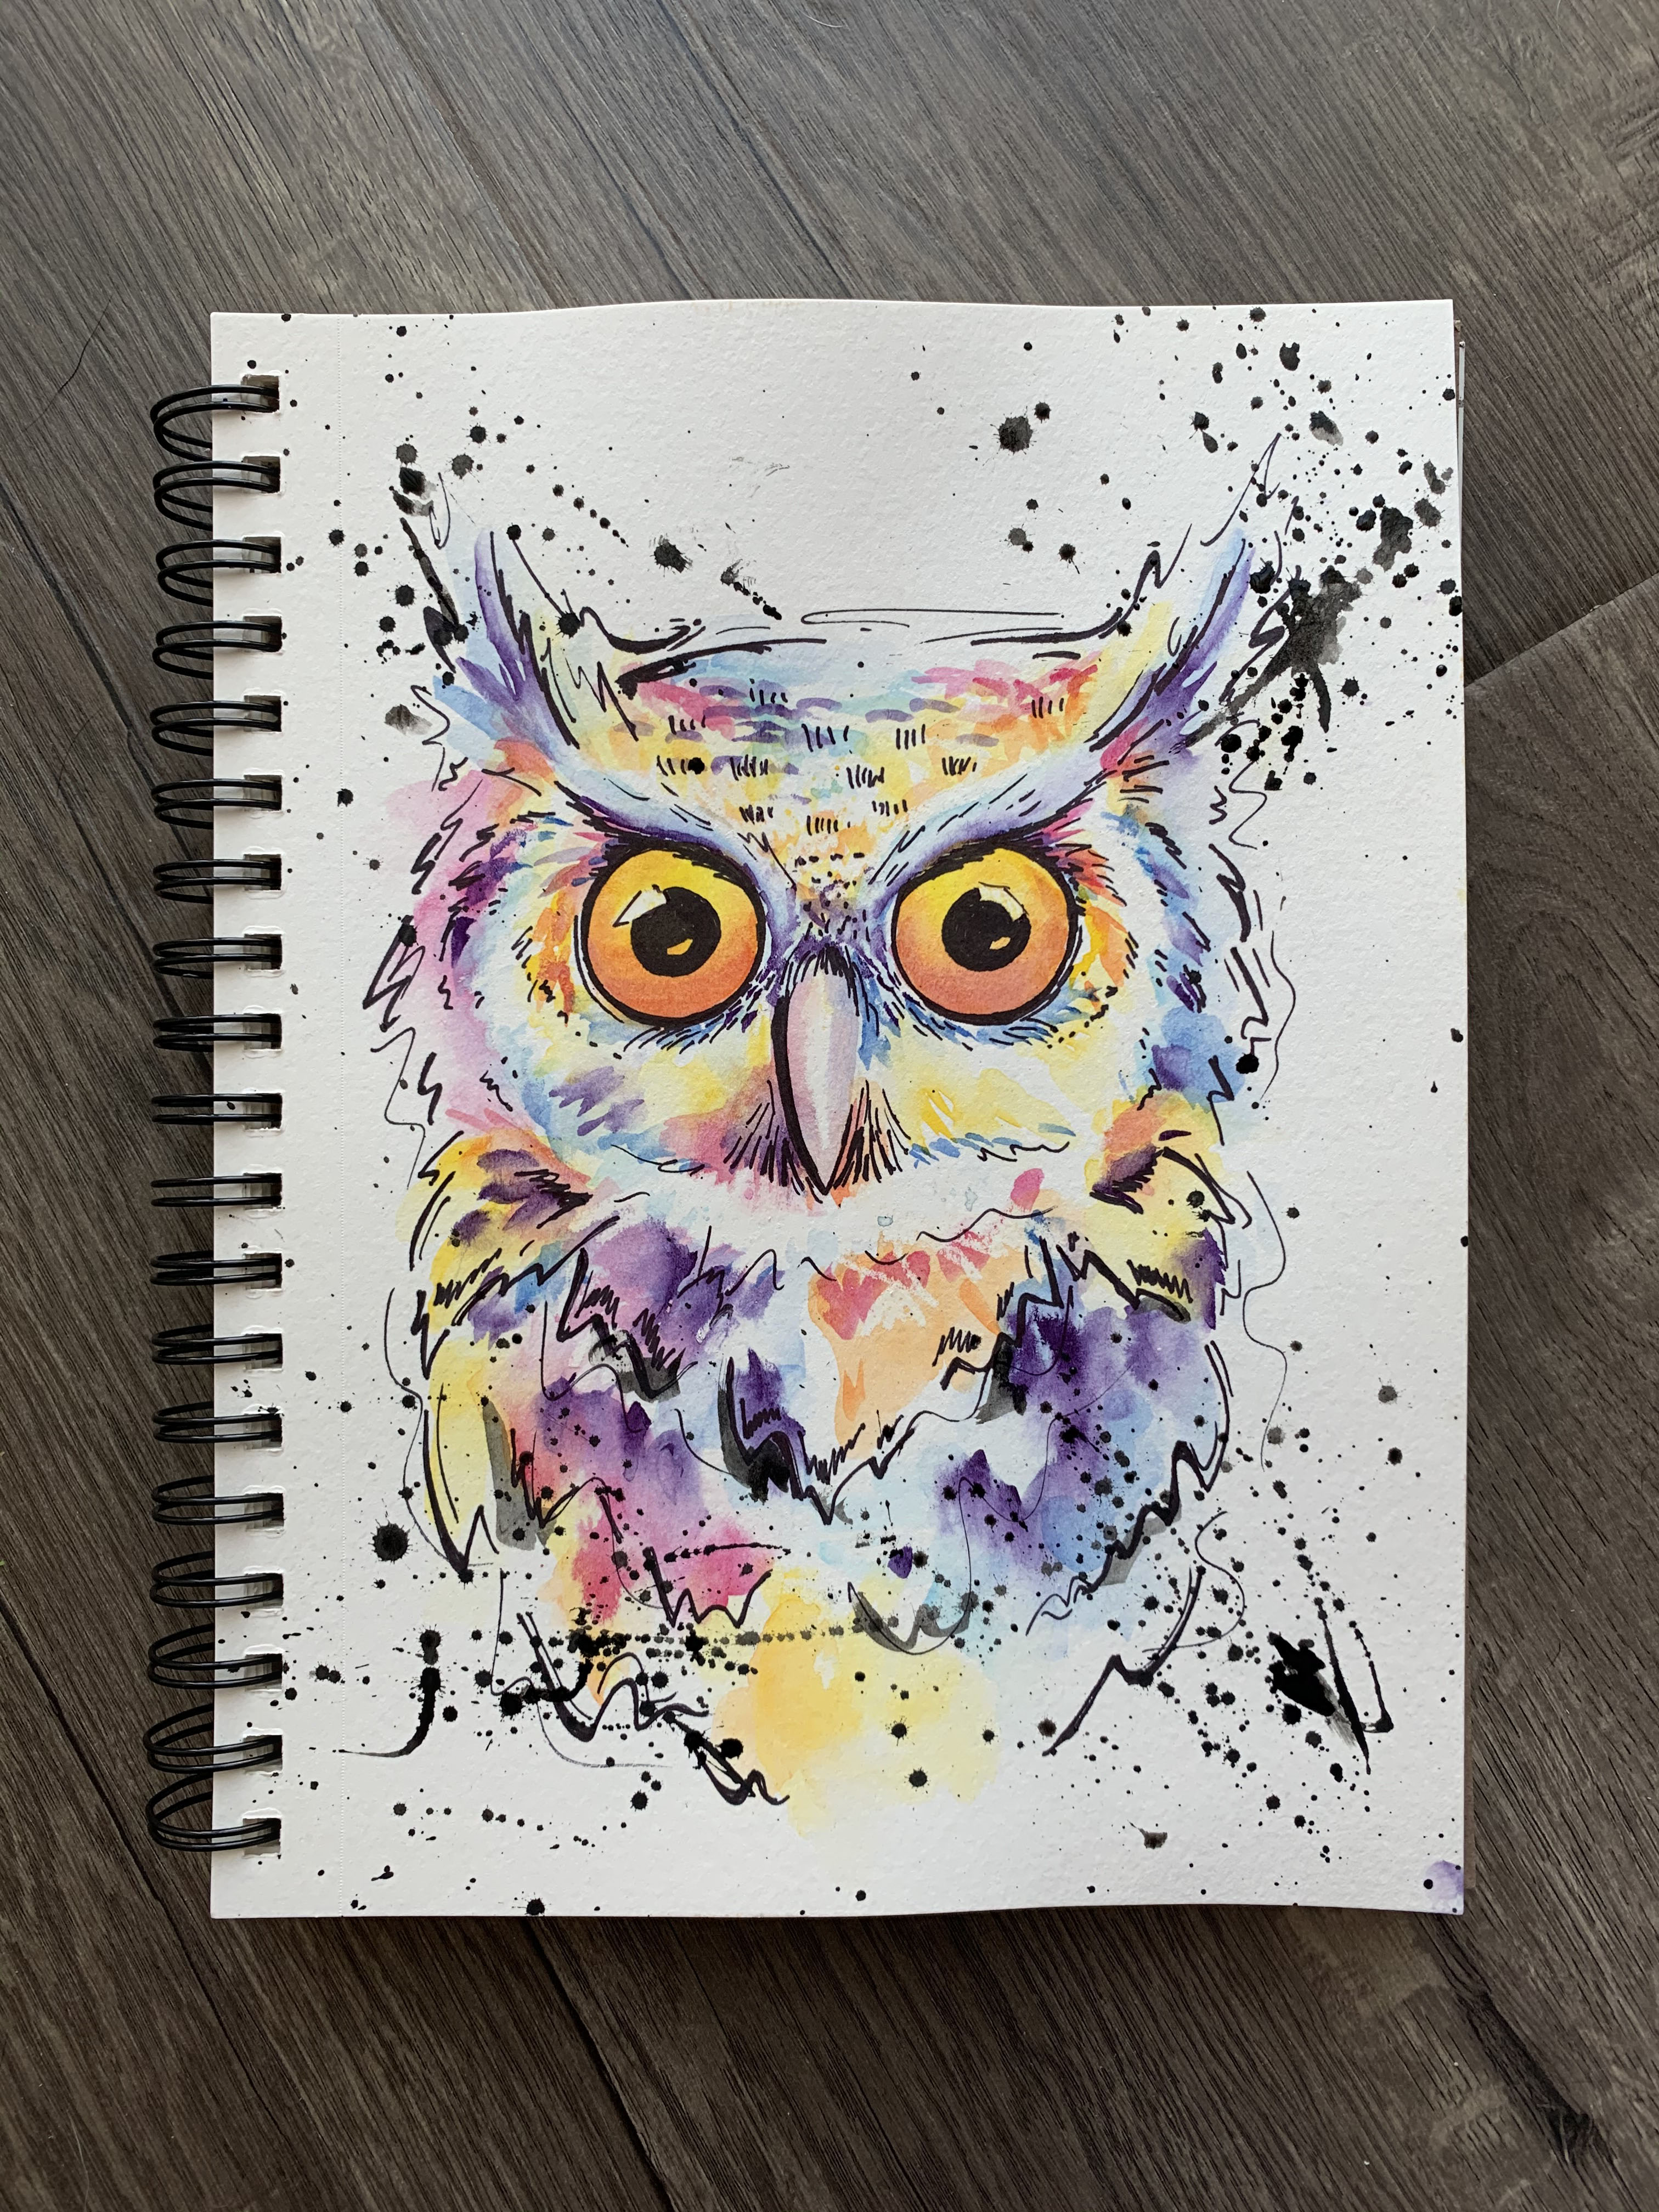 A Watercolor and sharpie Owl virtual experience project by Yaymaker